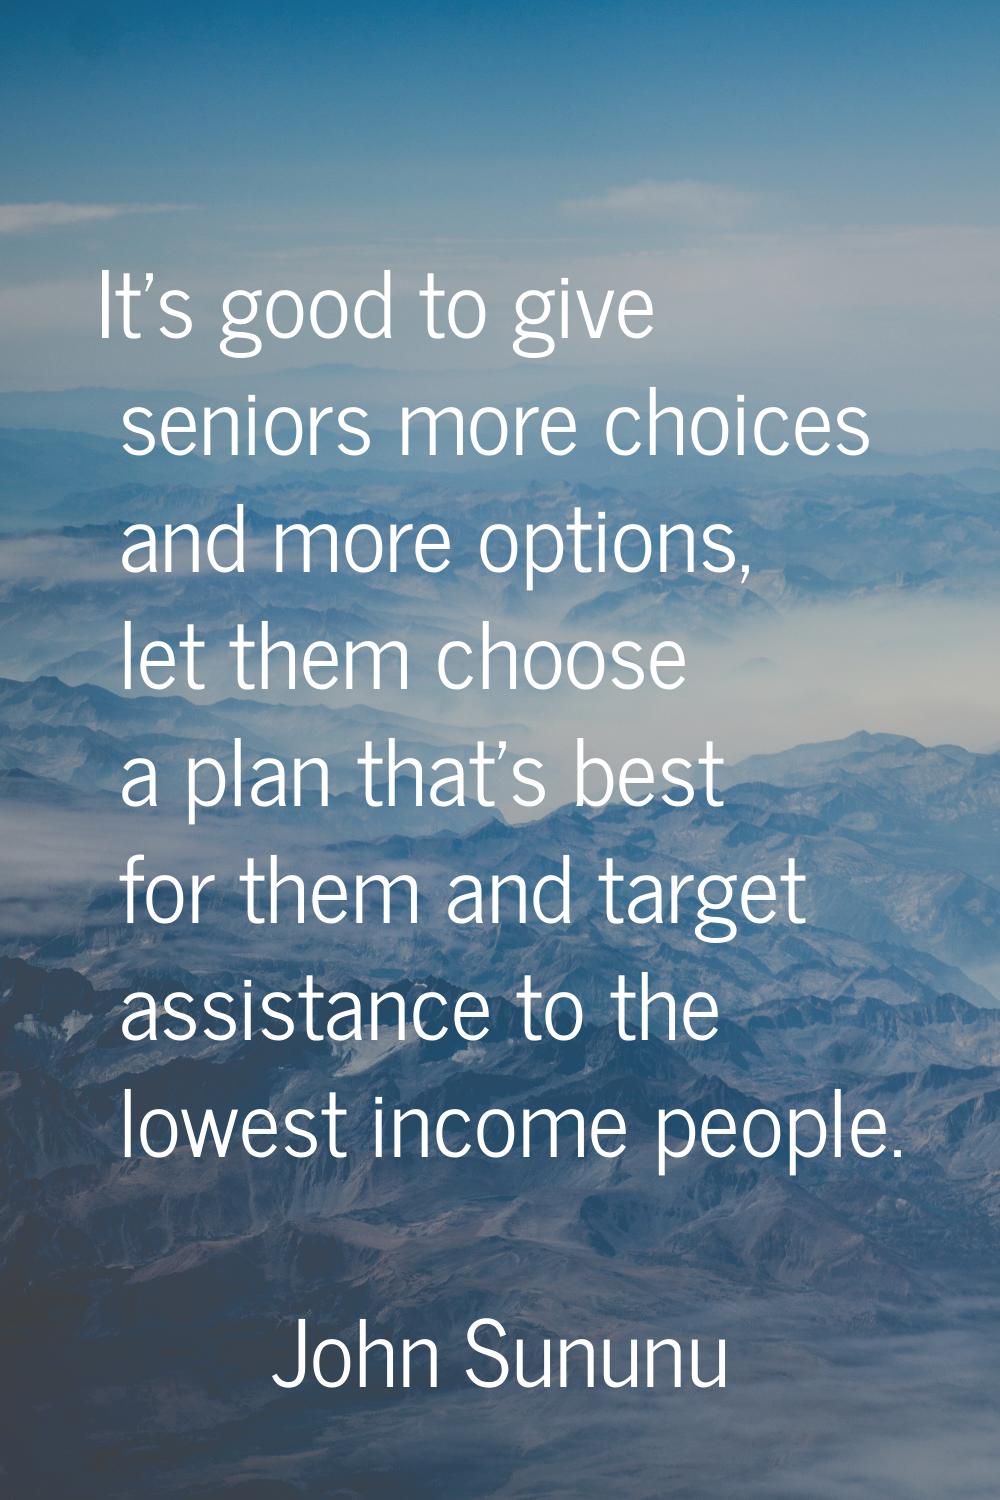 It's good to give seniors more choices and more options, let them choose a plan that's best for the